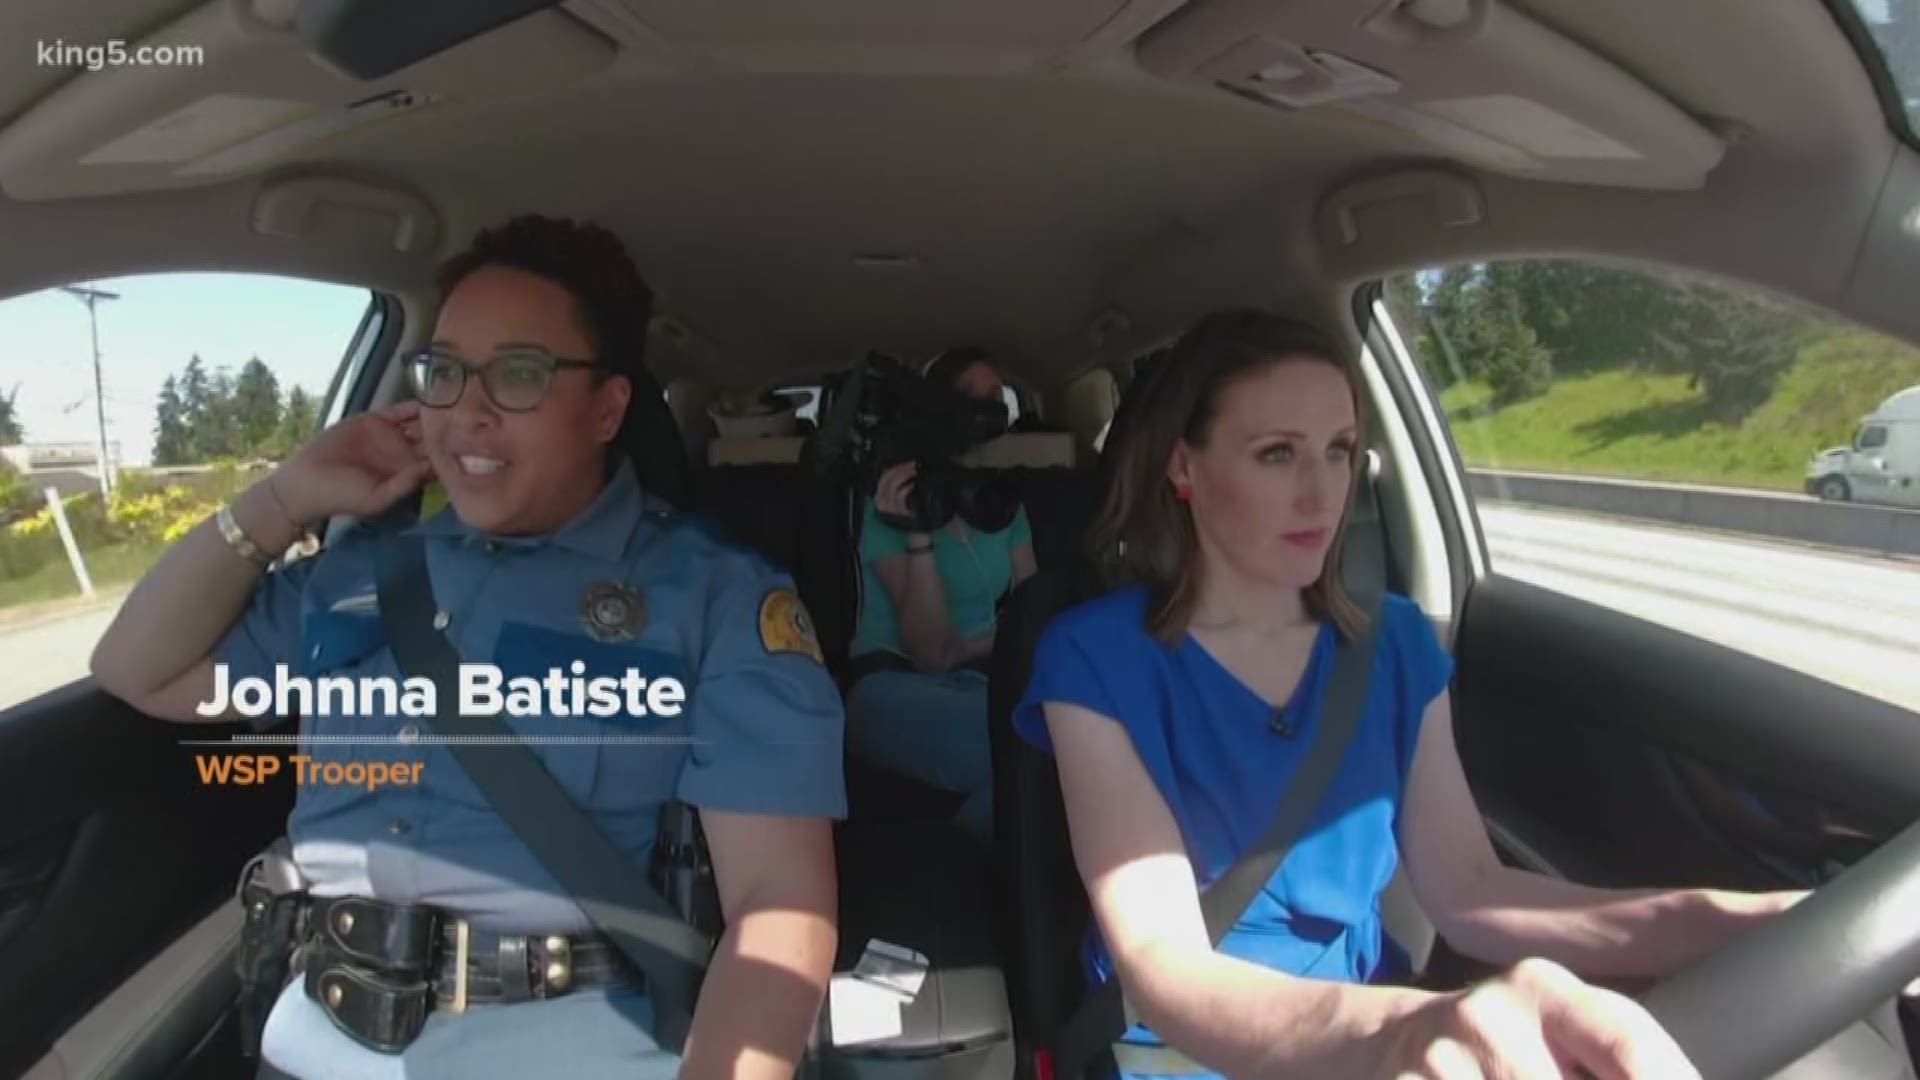 Take 5's Kaci Aitchison and WSP Trooper Johnna Batiste discuss driving etiquette. "Ask A Trooper: Horn-honking etiquette and Northwest drivers" king5.com/take5